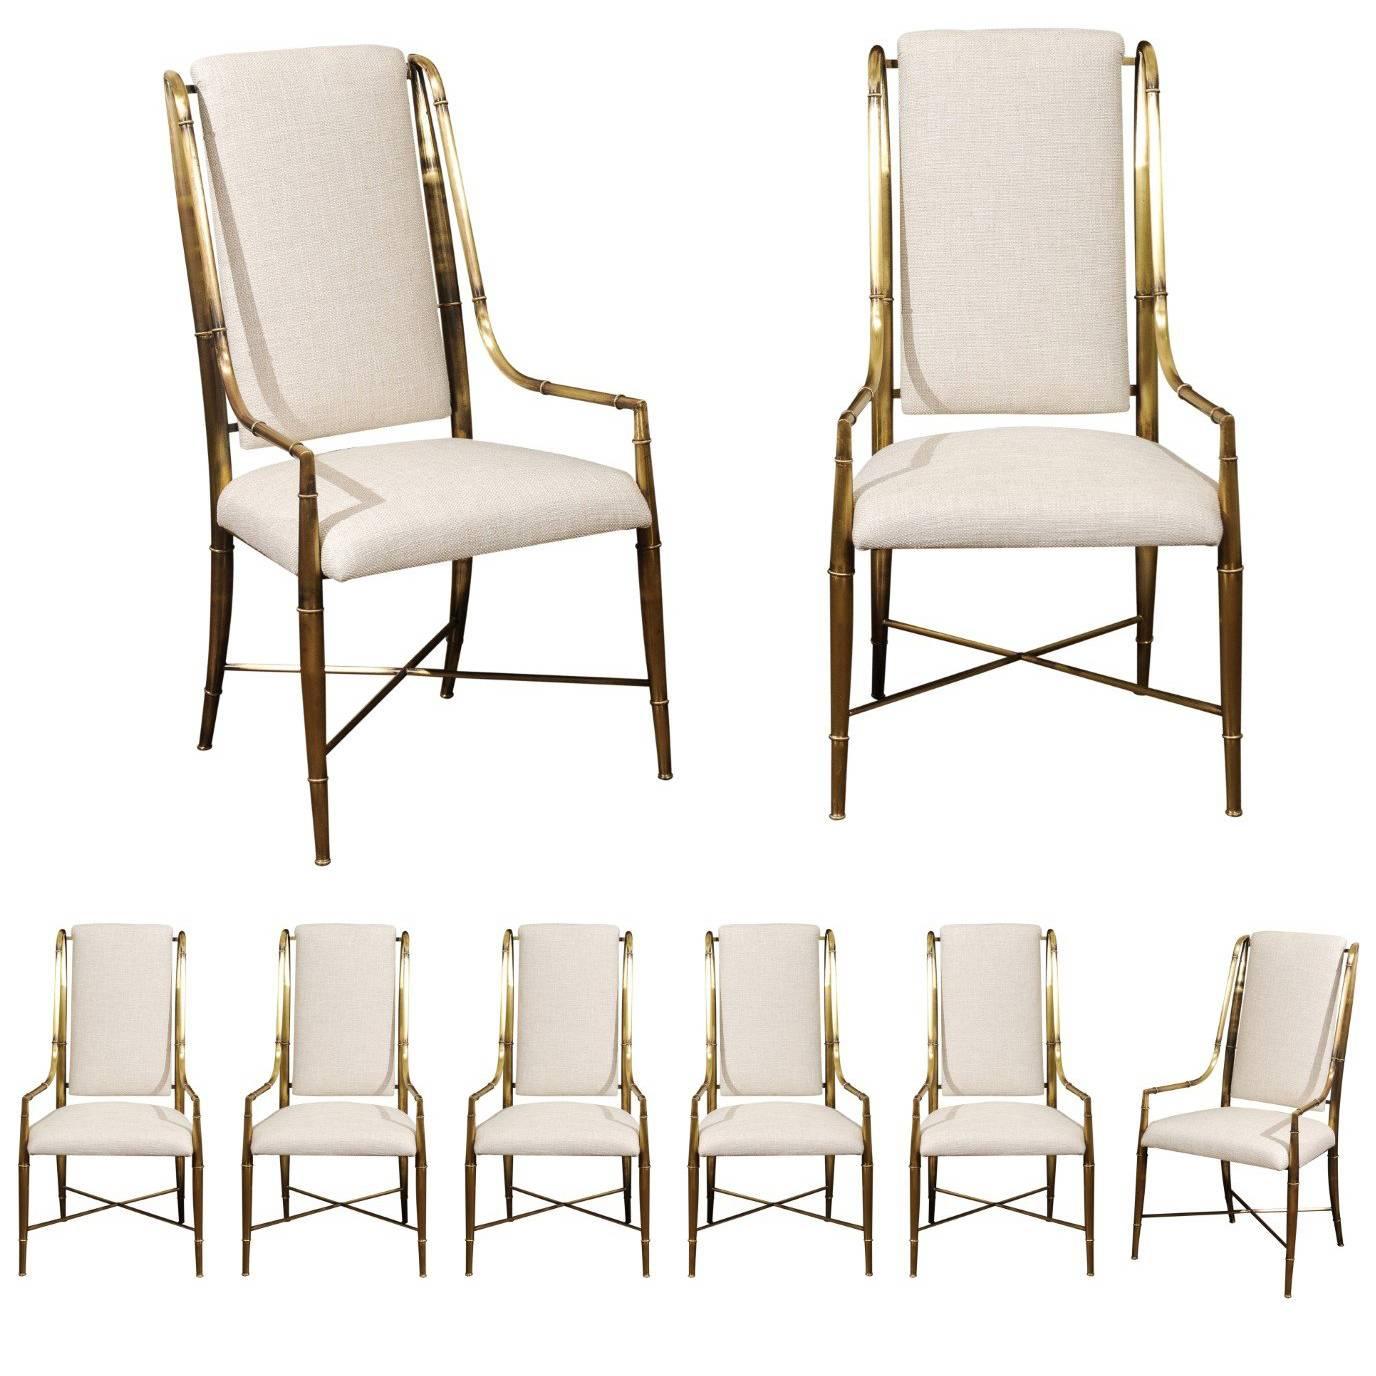 Magnificent Set of Ten Dining Chairs by Weiman/Warren Lloyd for Mastercraft For Sale